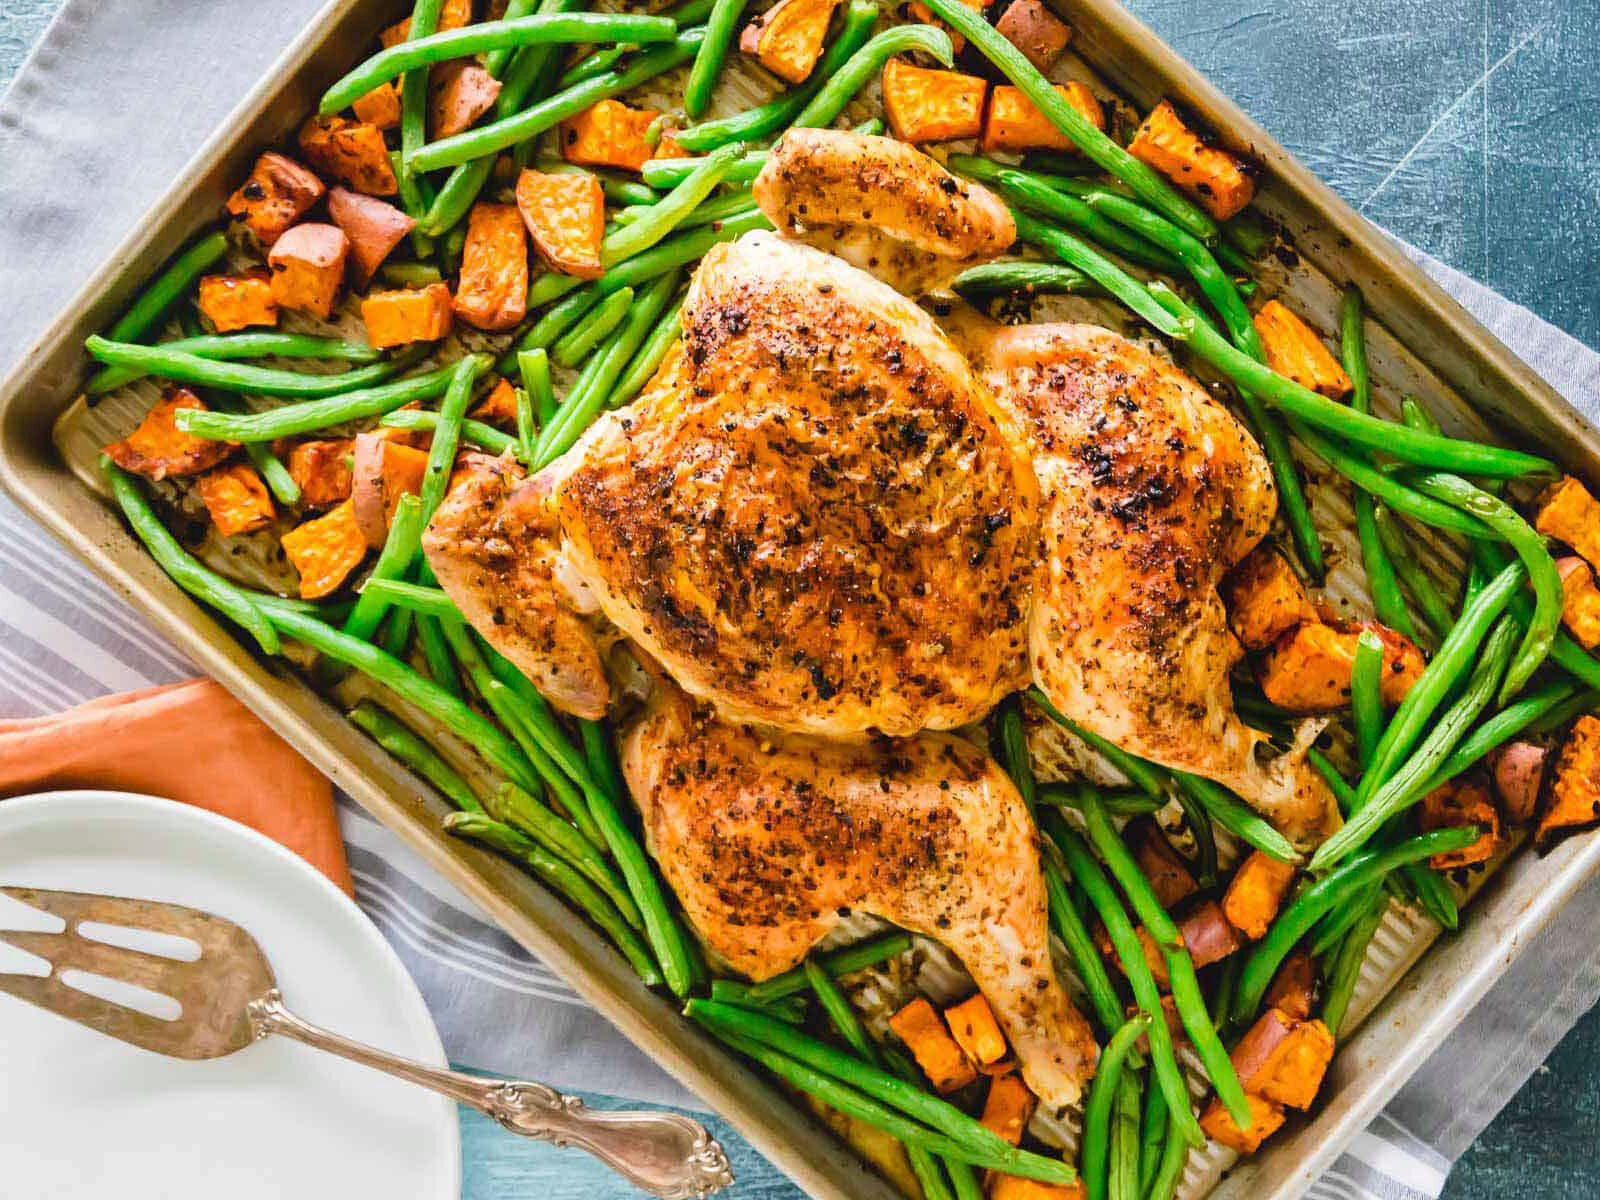 8 Healthy & Easy Winter Sheet Pan Dinners You’ll Love